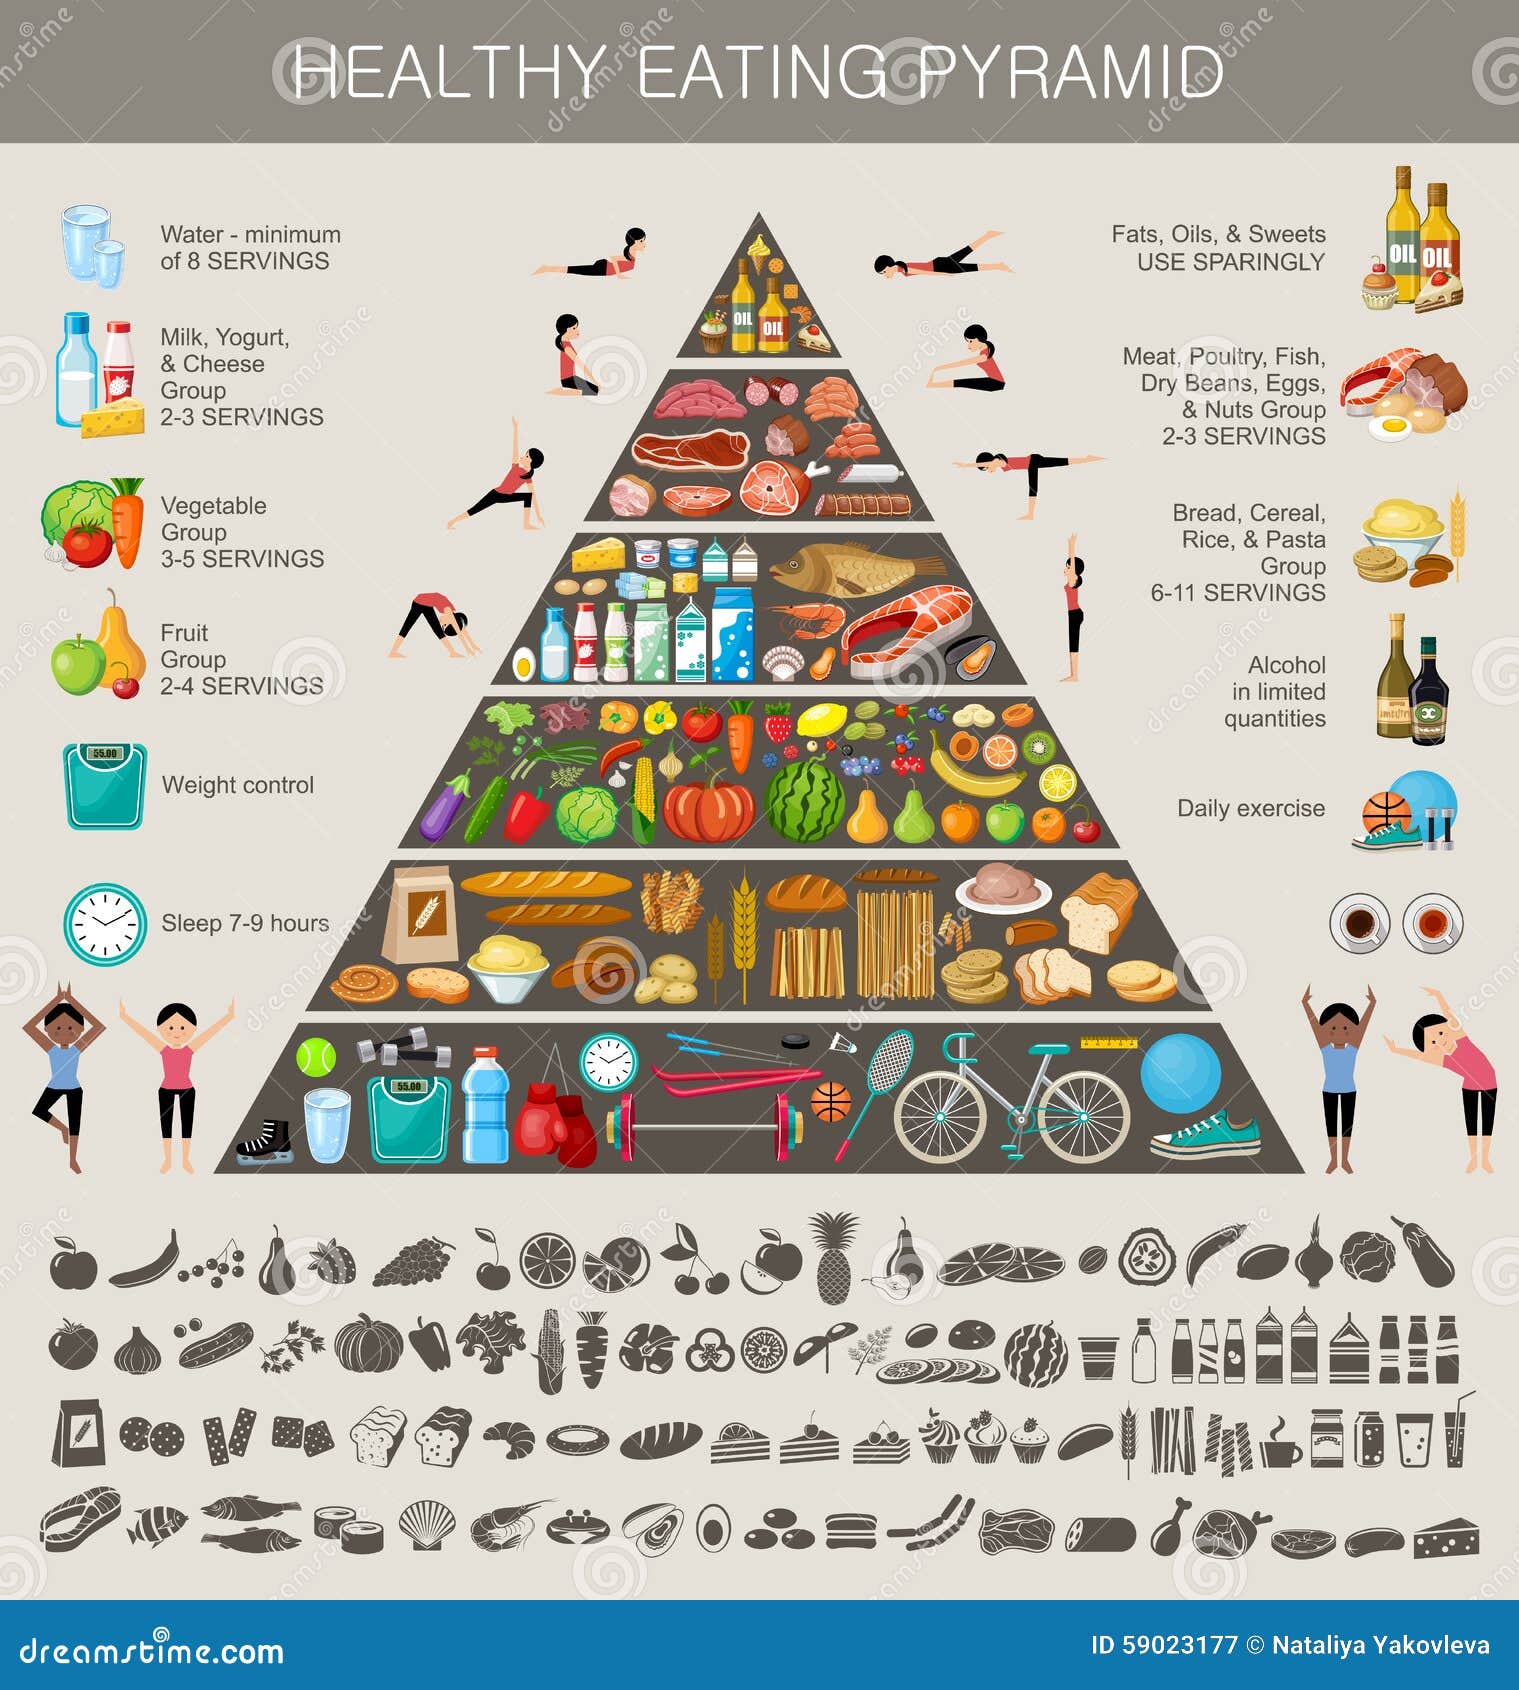 food pyramid healthy eating infographic